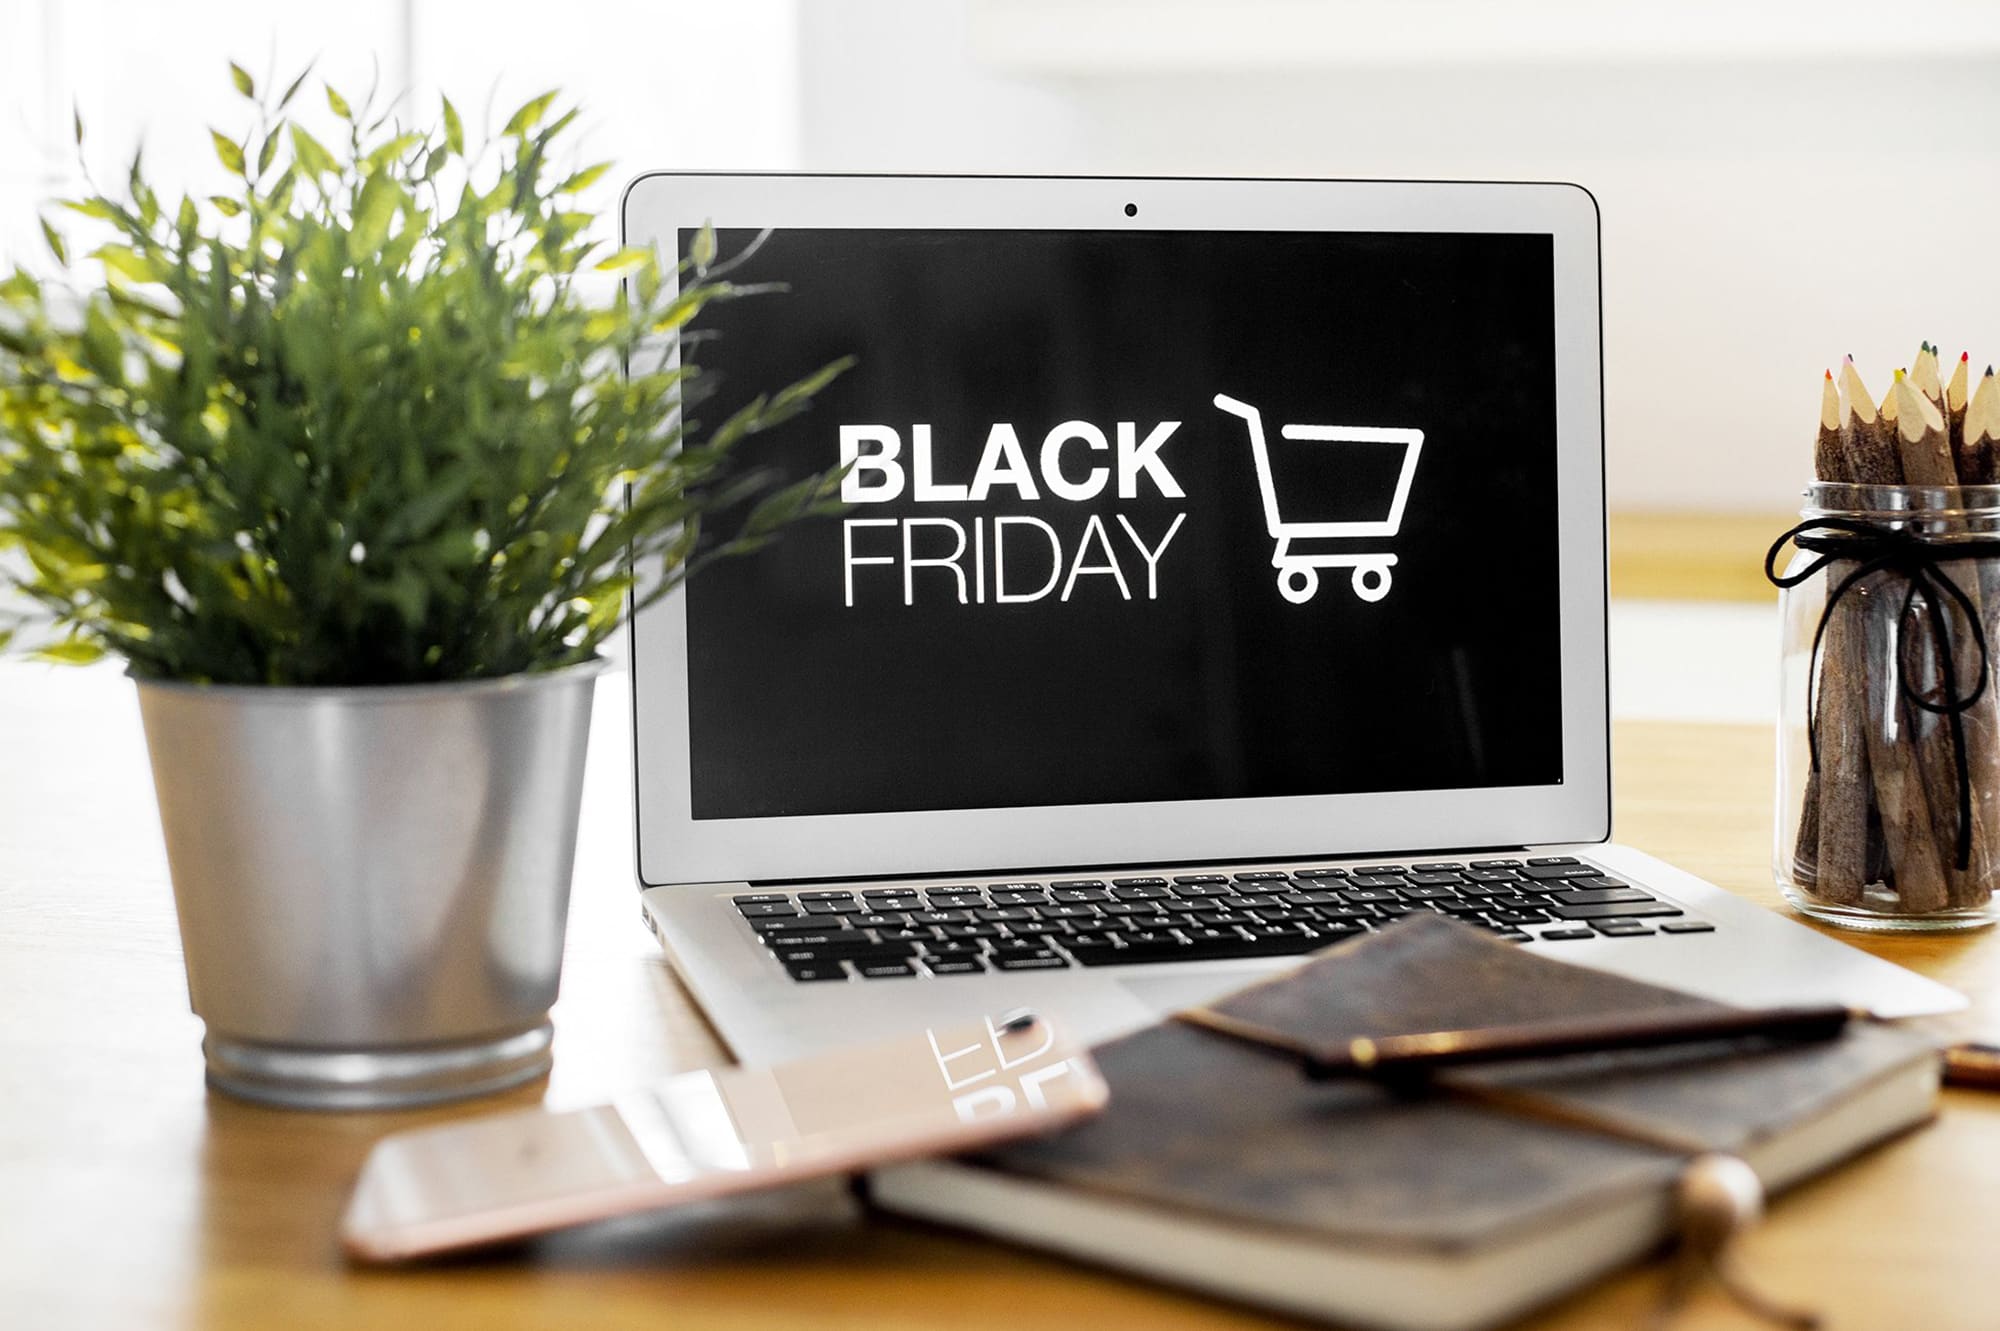 Could your website handle a Black Friday shopping euphoria?